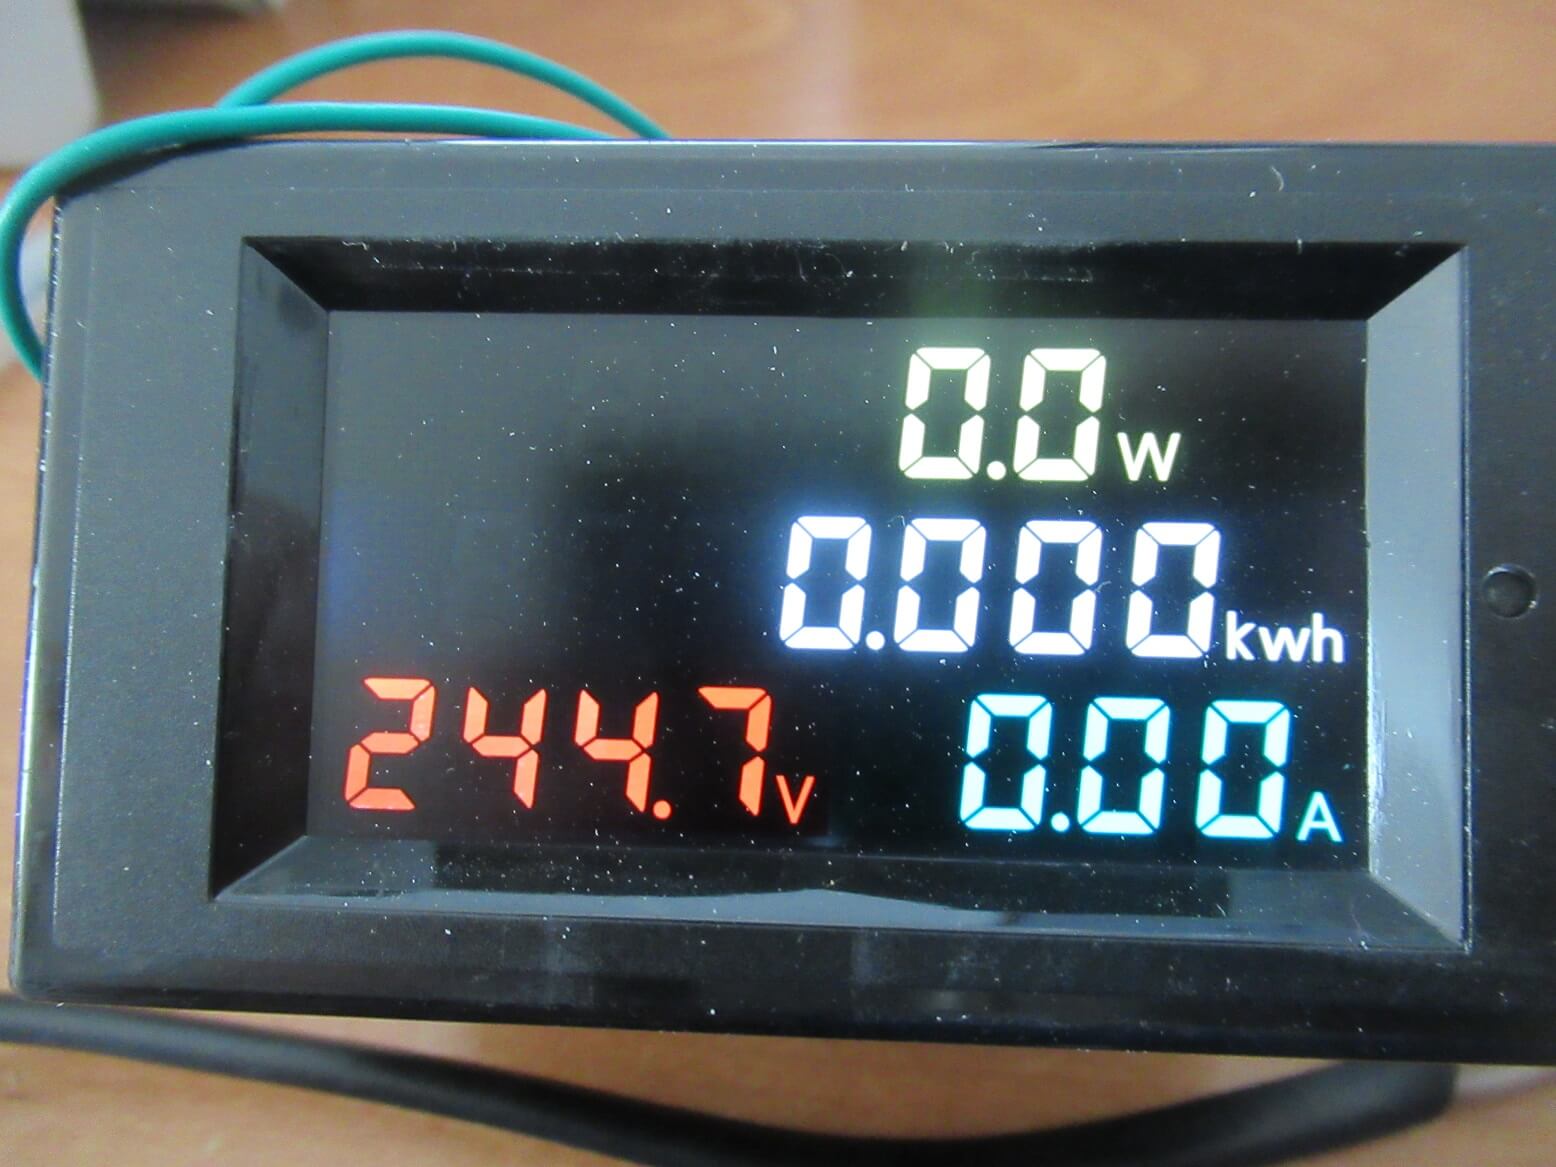 D69-2049  AC Color display Voltmeter Ammeter with Wattmeter and Energy meter with 100A CT